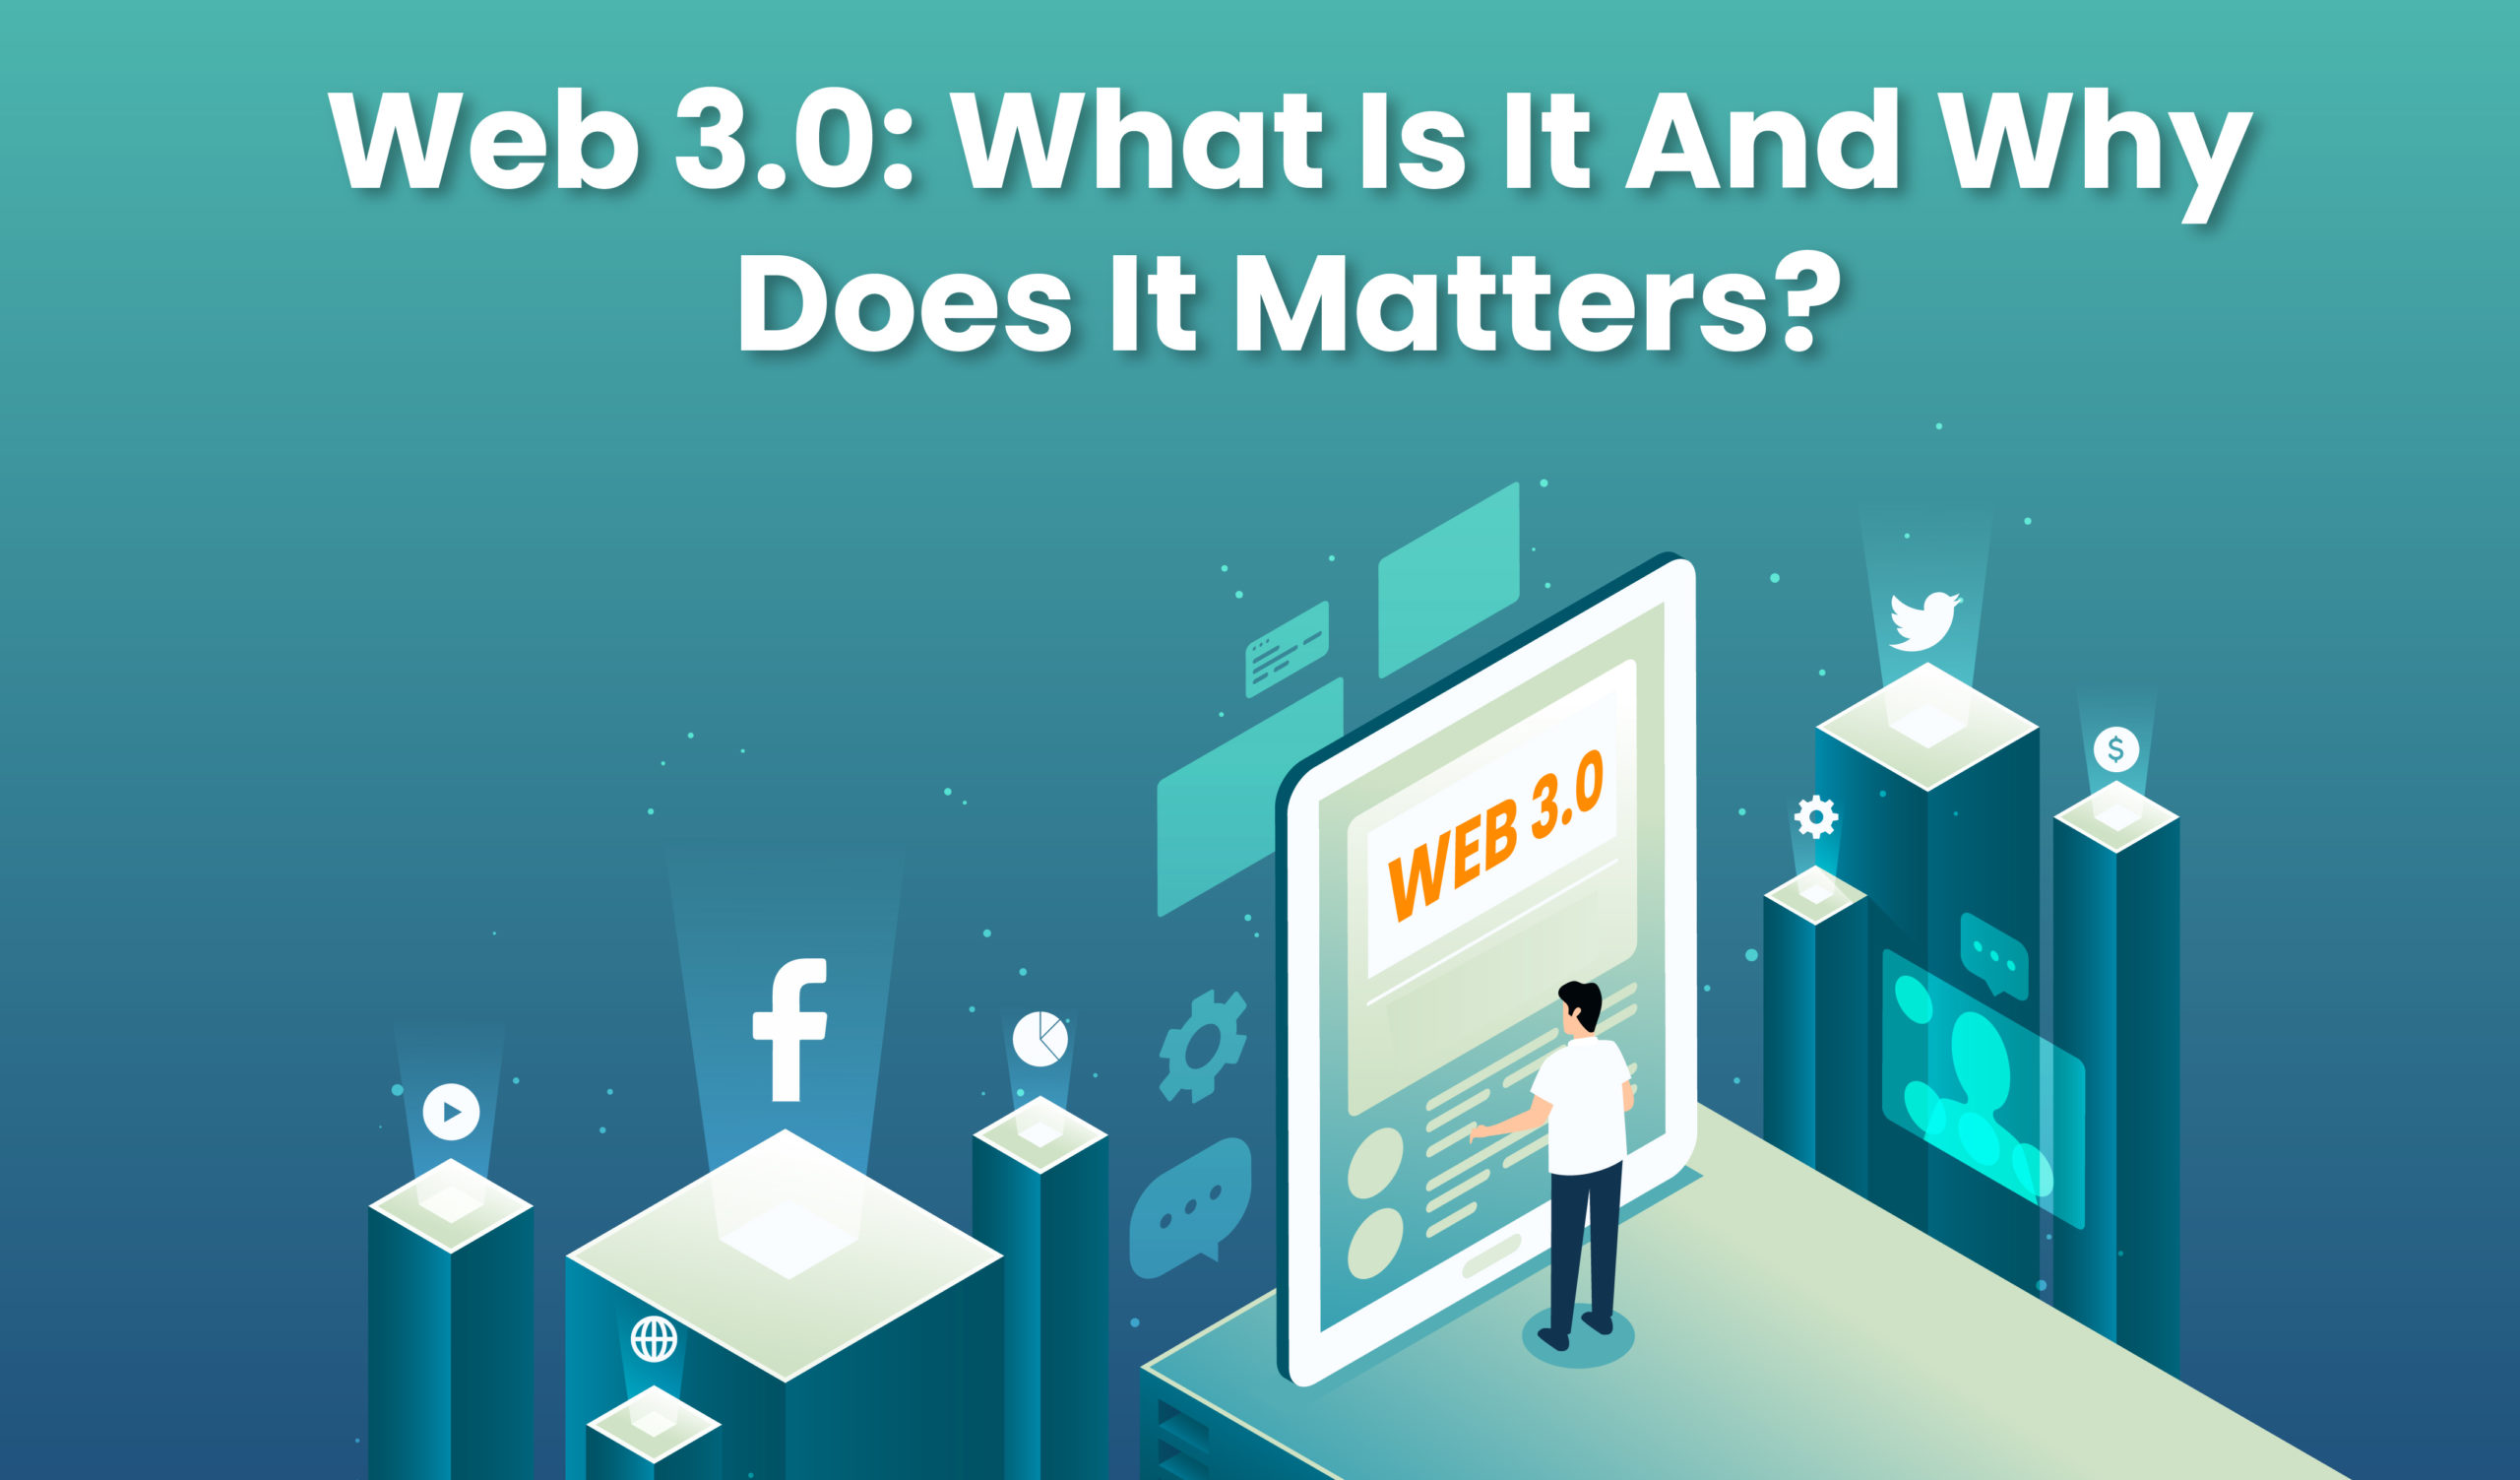 Web 3.0: What Is It And Why Does It Matter?